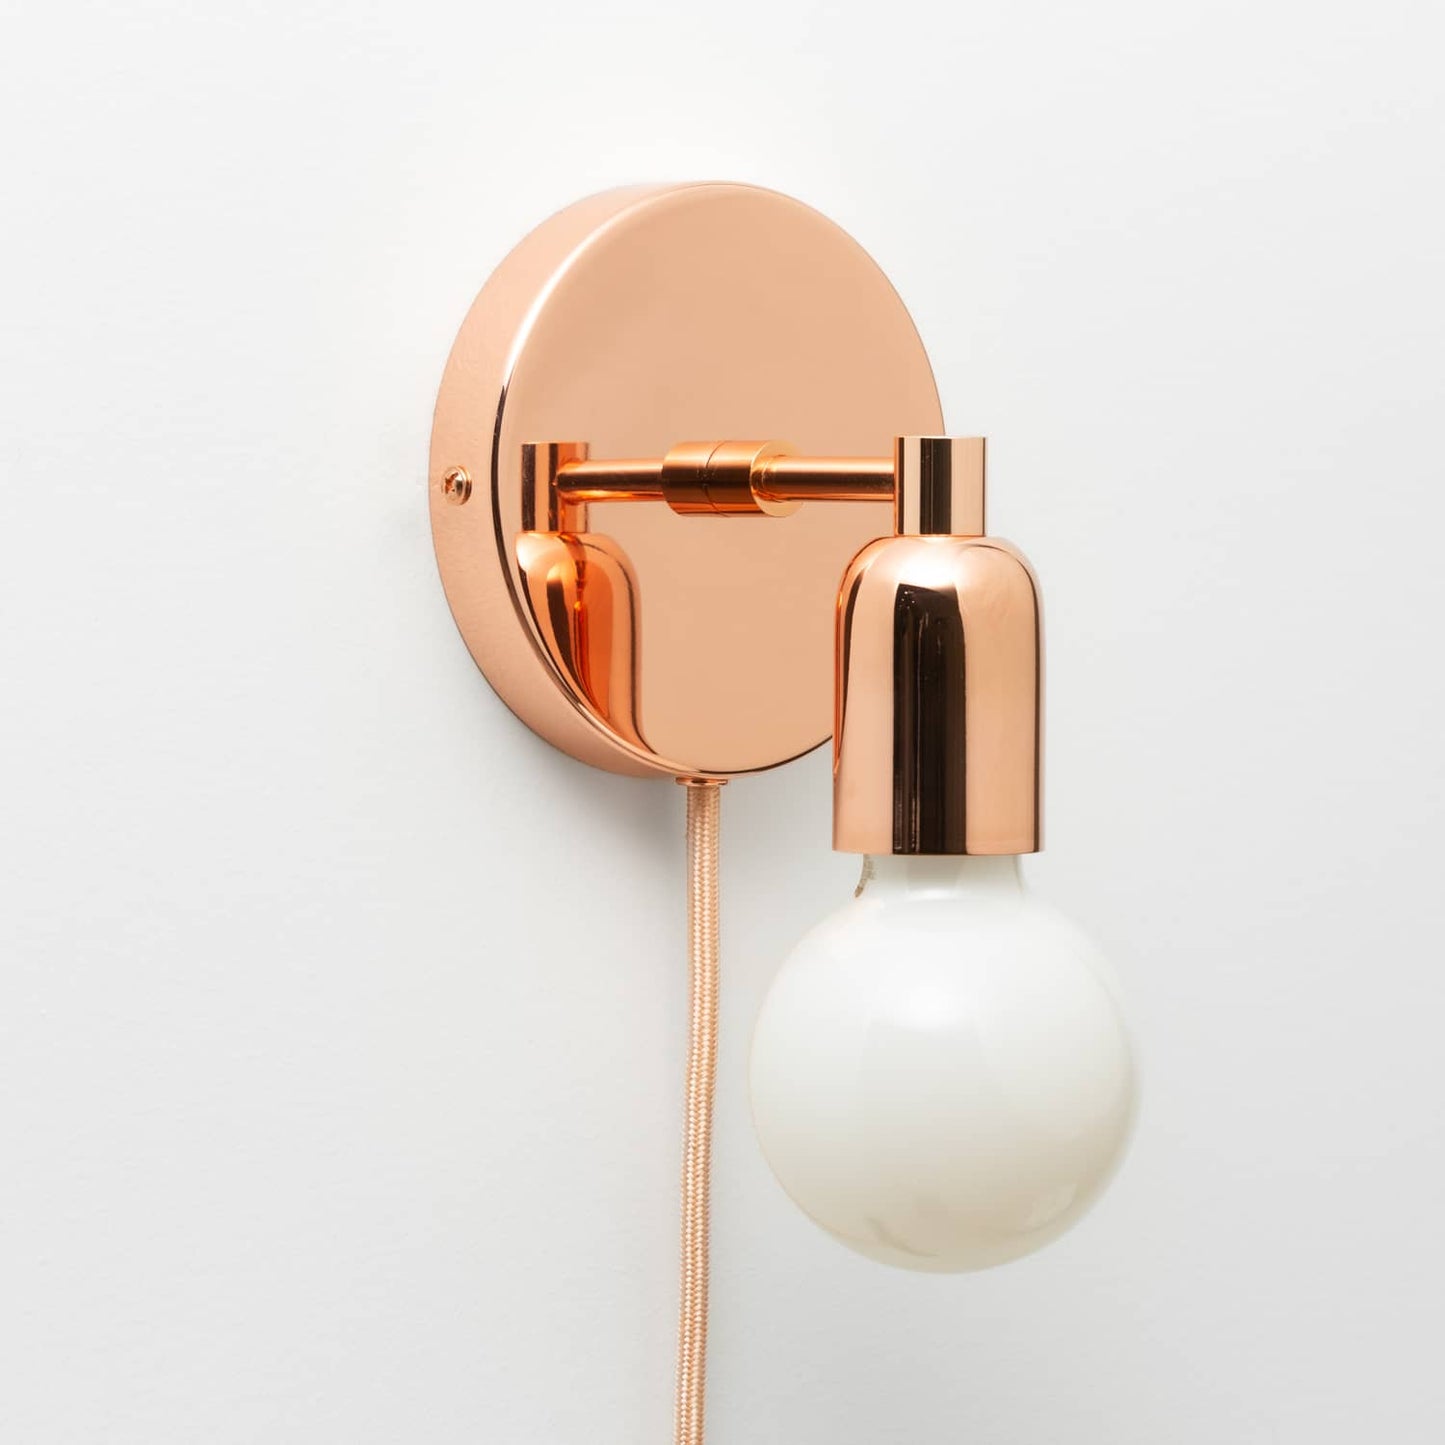 Junction Mini Solo Plug-In Sconce in Polished Copper finish pictured with G25 light bulb